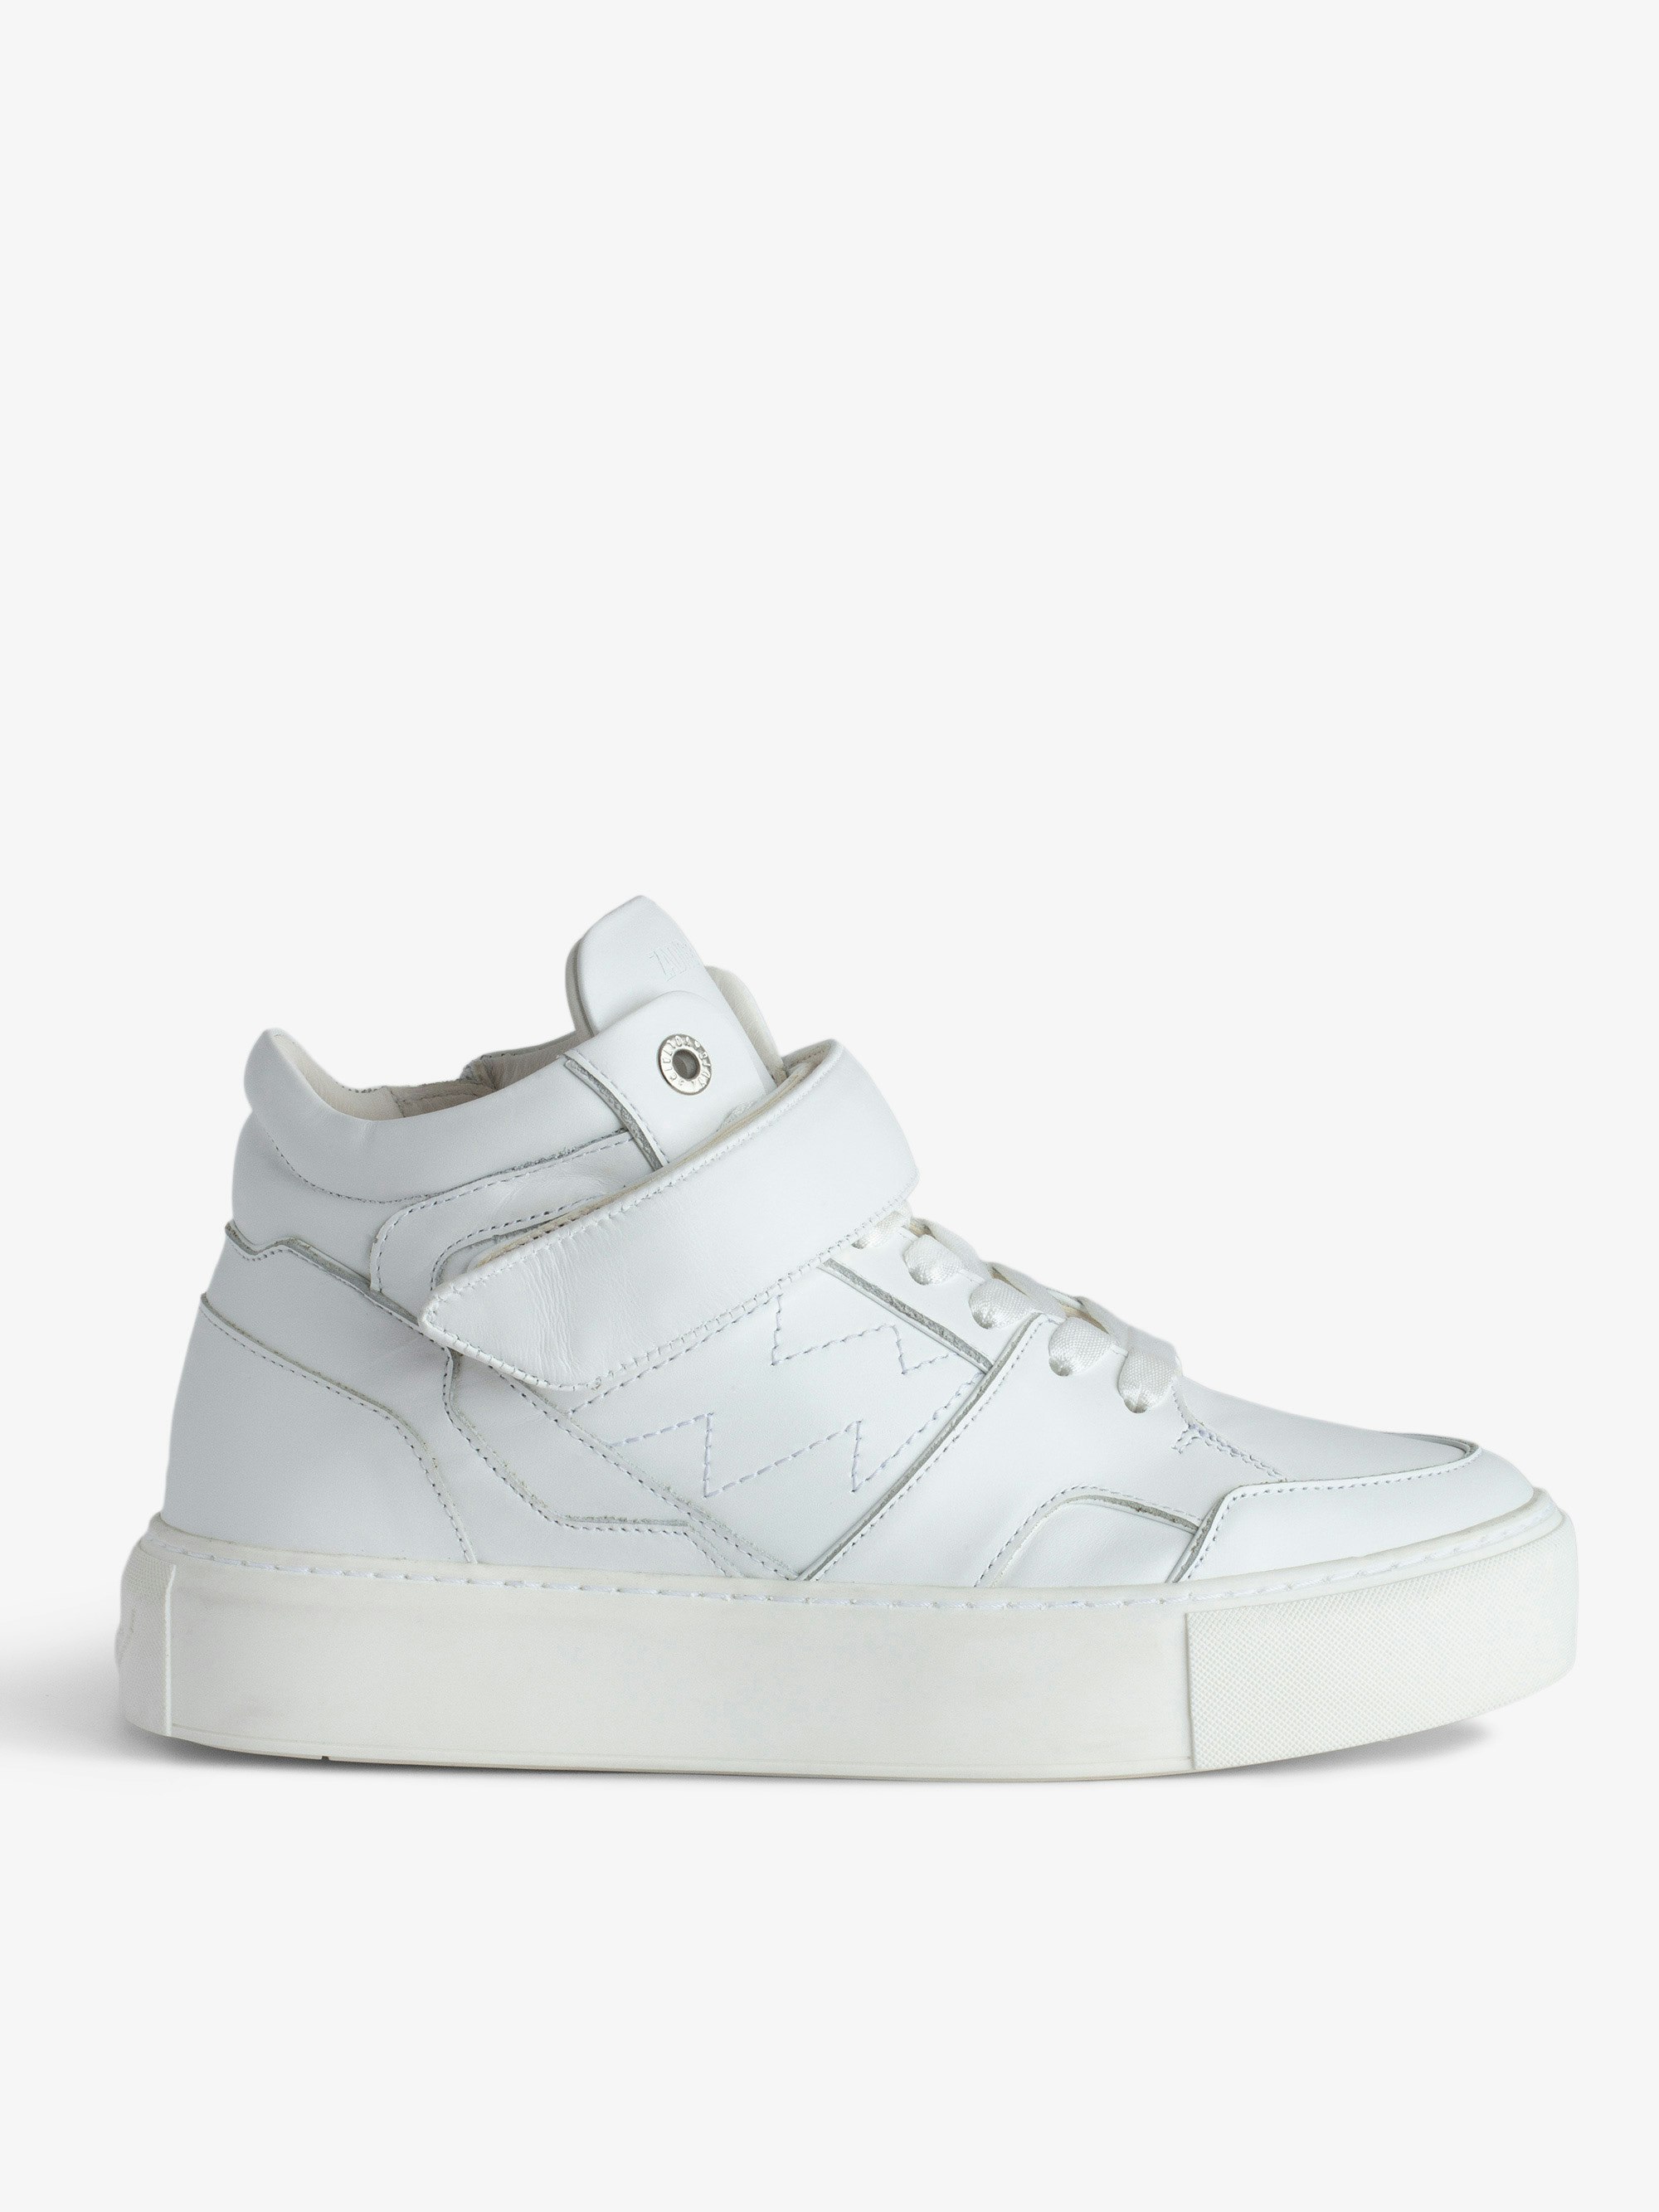 ZV1747 Flash Chunky Mid-Top Trainers - Women’s white smooth leather mid-top trainers with Velcro fastening, lightning bolt panels and chunky sole.